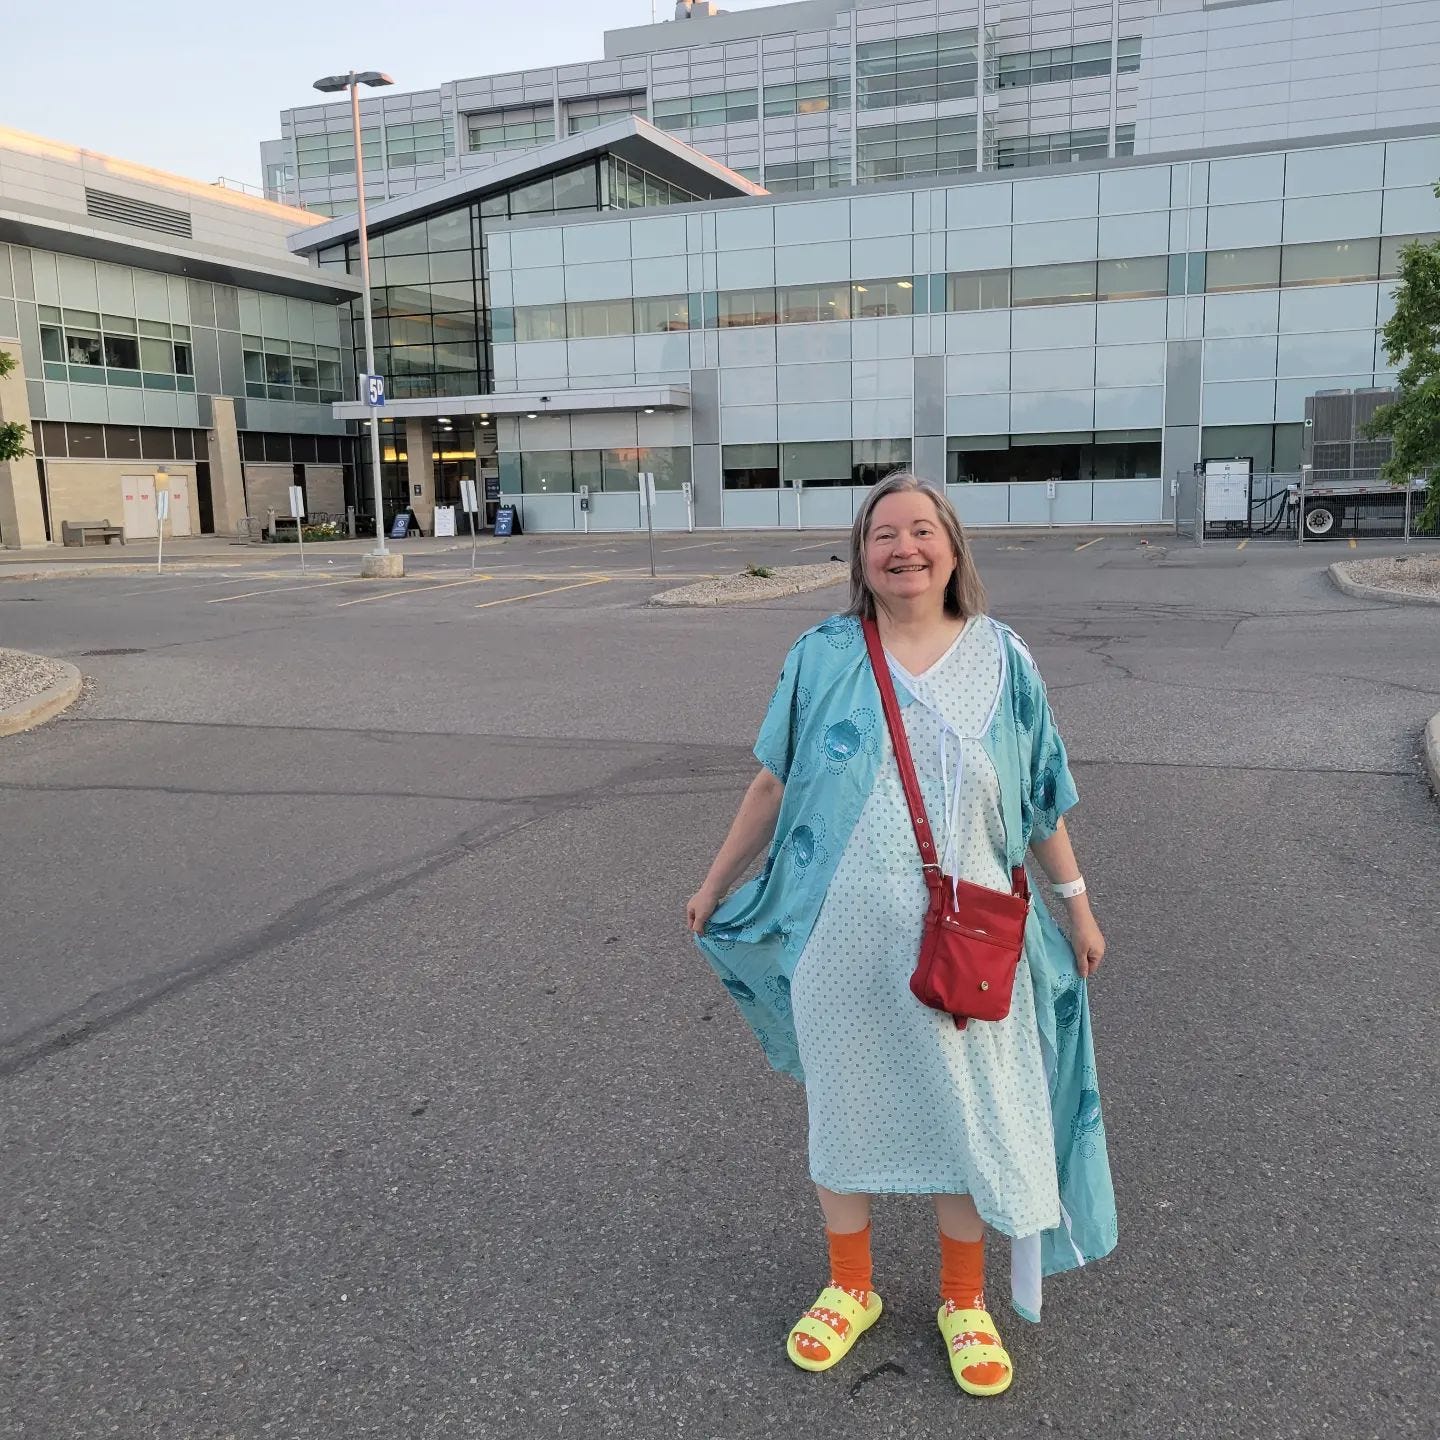 woman wearing a hospital gown and another gown as jacket, with yellow crocs and a red purse over the shoulder. She stands in front of the Ottawa General parking lot and smiles